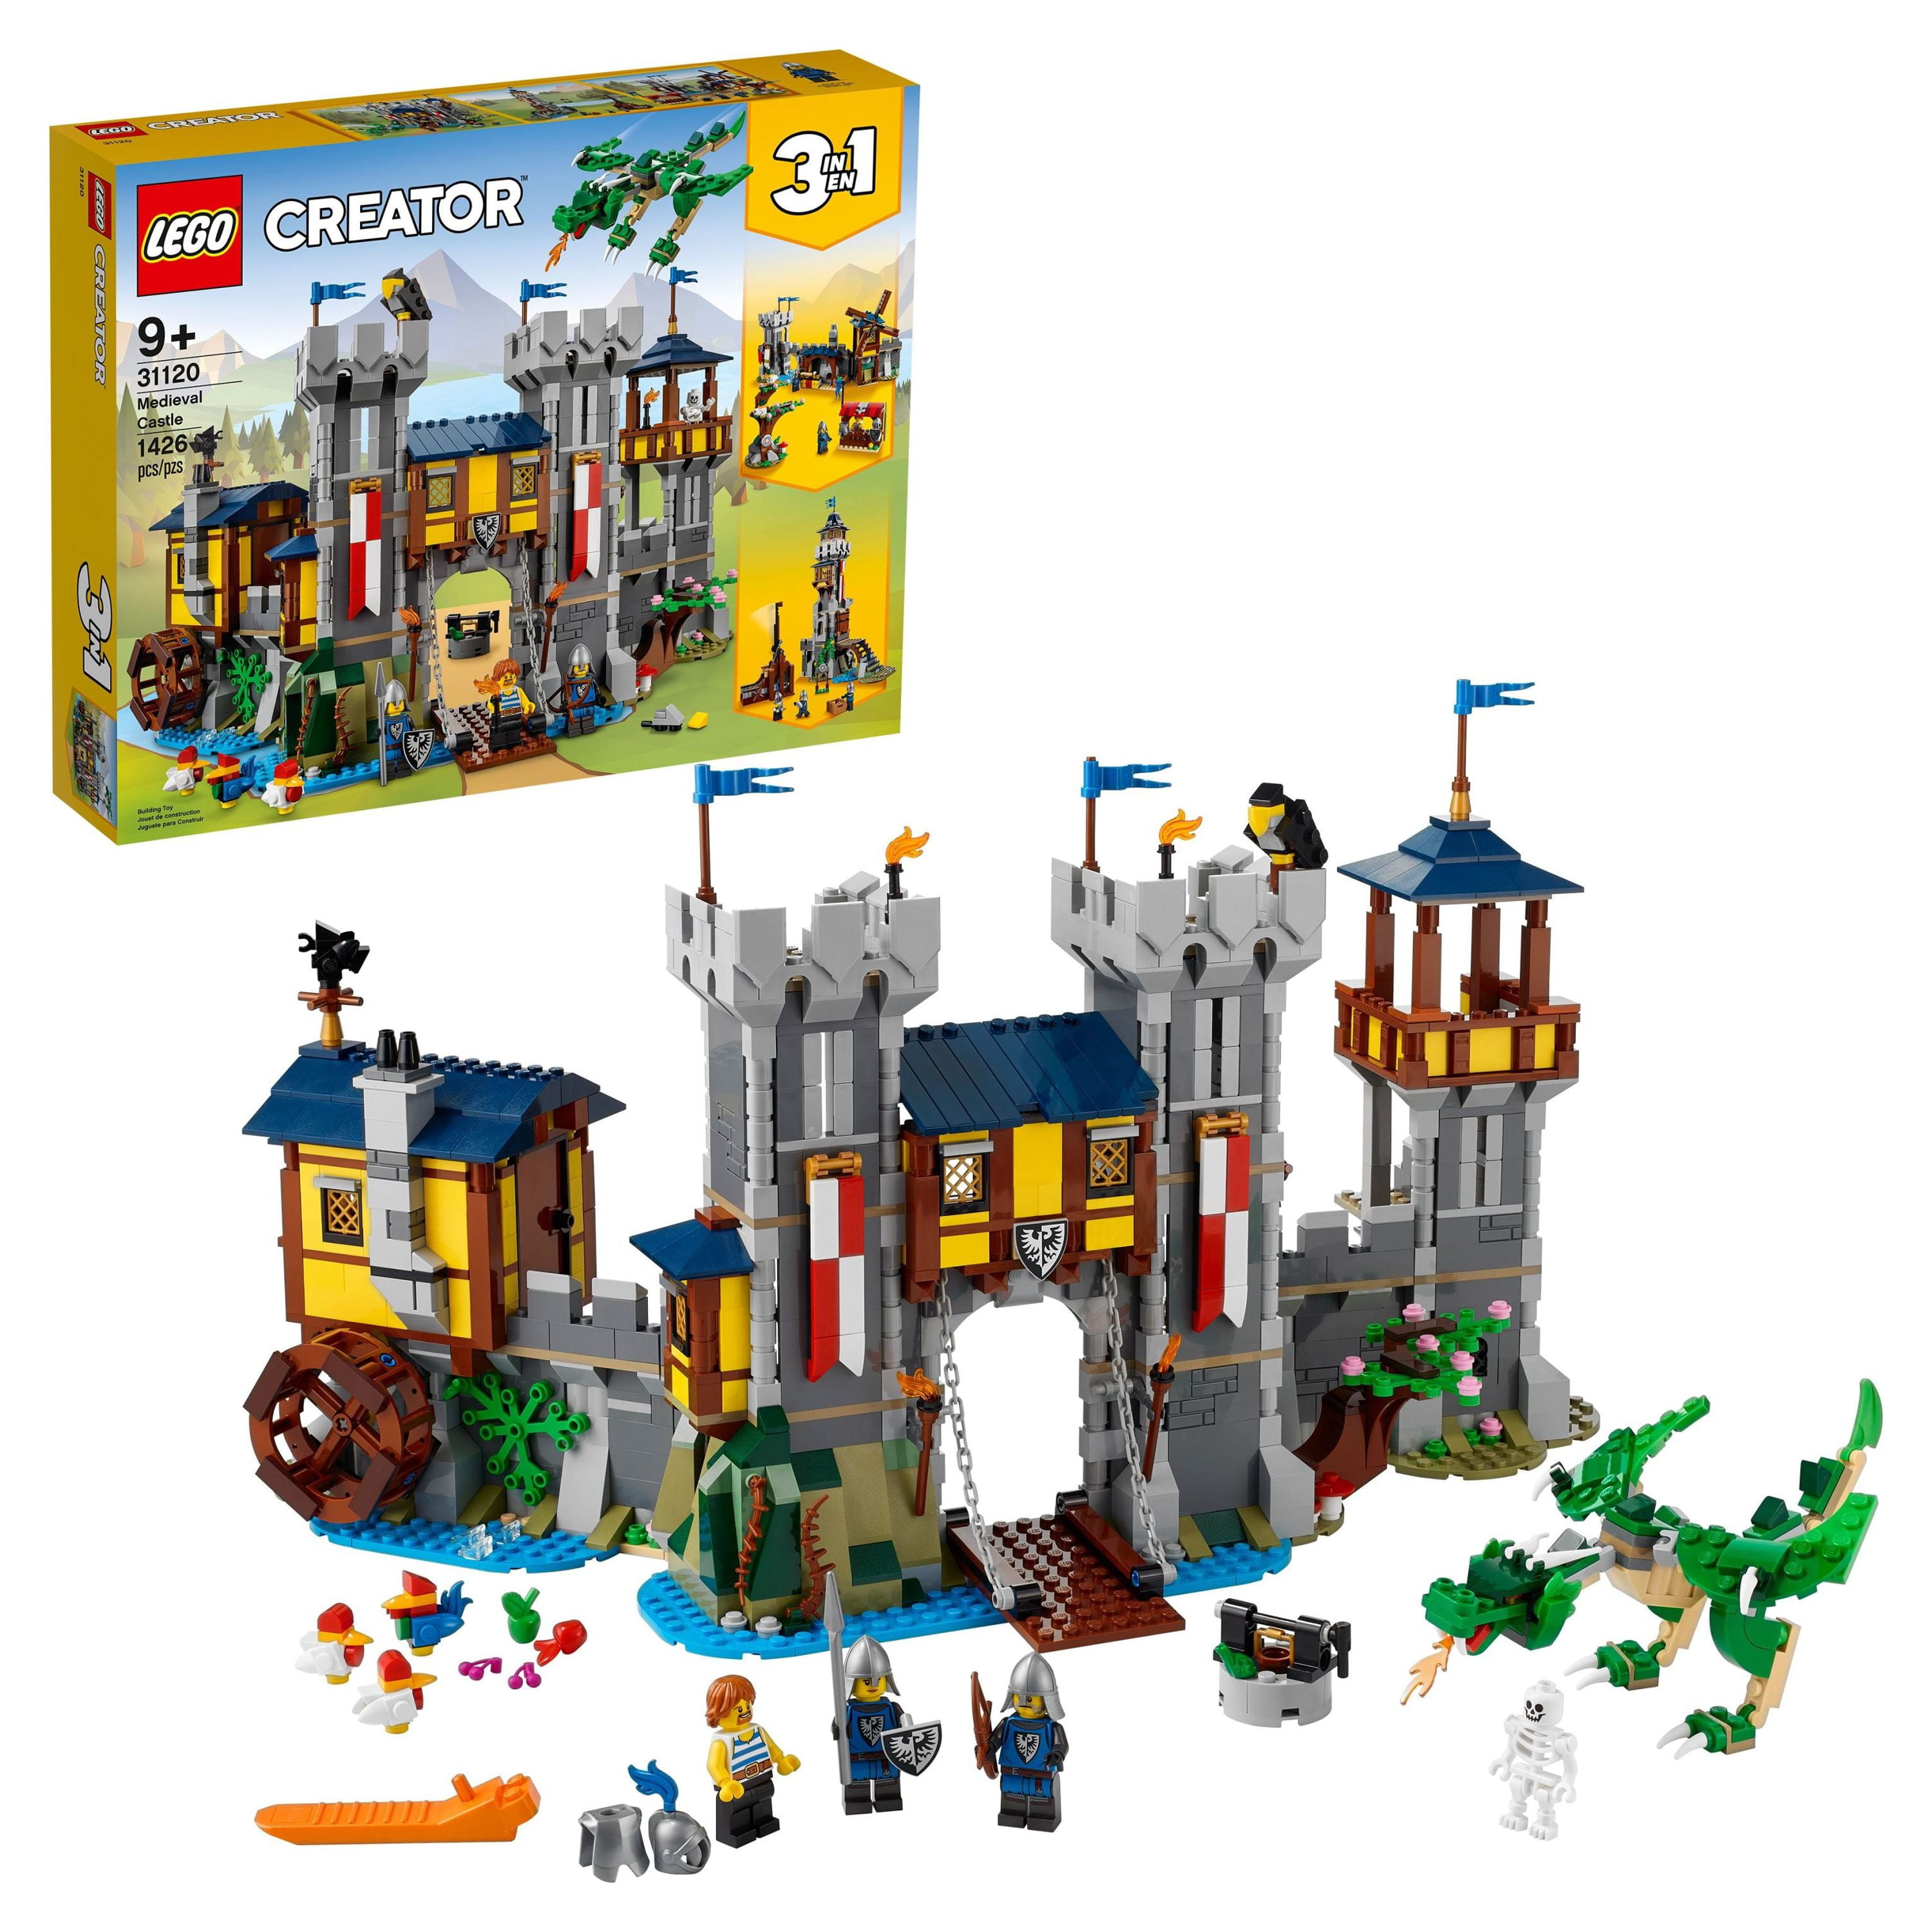 LEGO Harry Potter Hogwarts Courtyard: Sirius's Rescue 76401 Castle Tower  Toy, Collectible Set with Buckbeak Hippogriff Figure and Prison Cell 